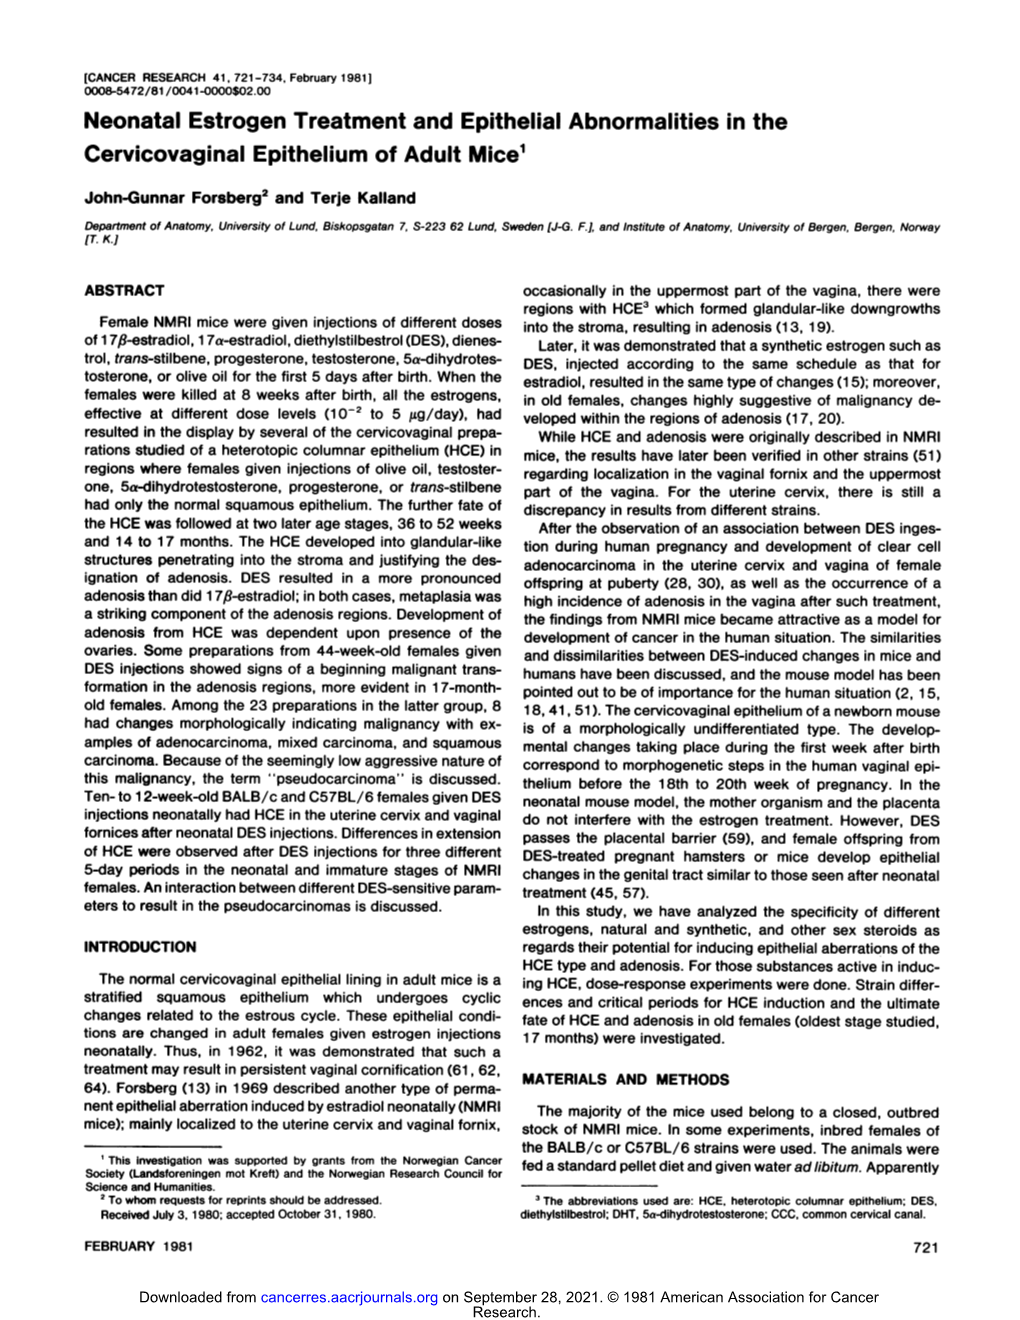 Neonatal Estrogen Treatment and Epithelial Abnormalities Inthe